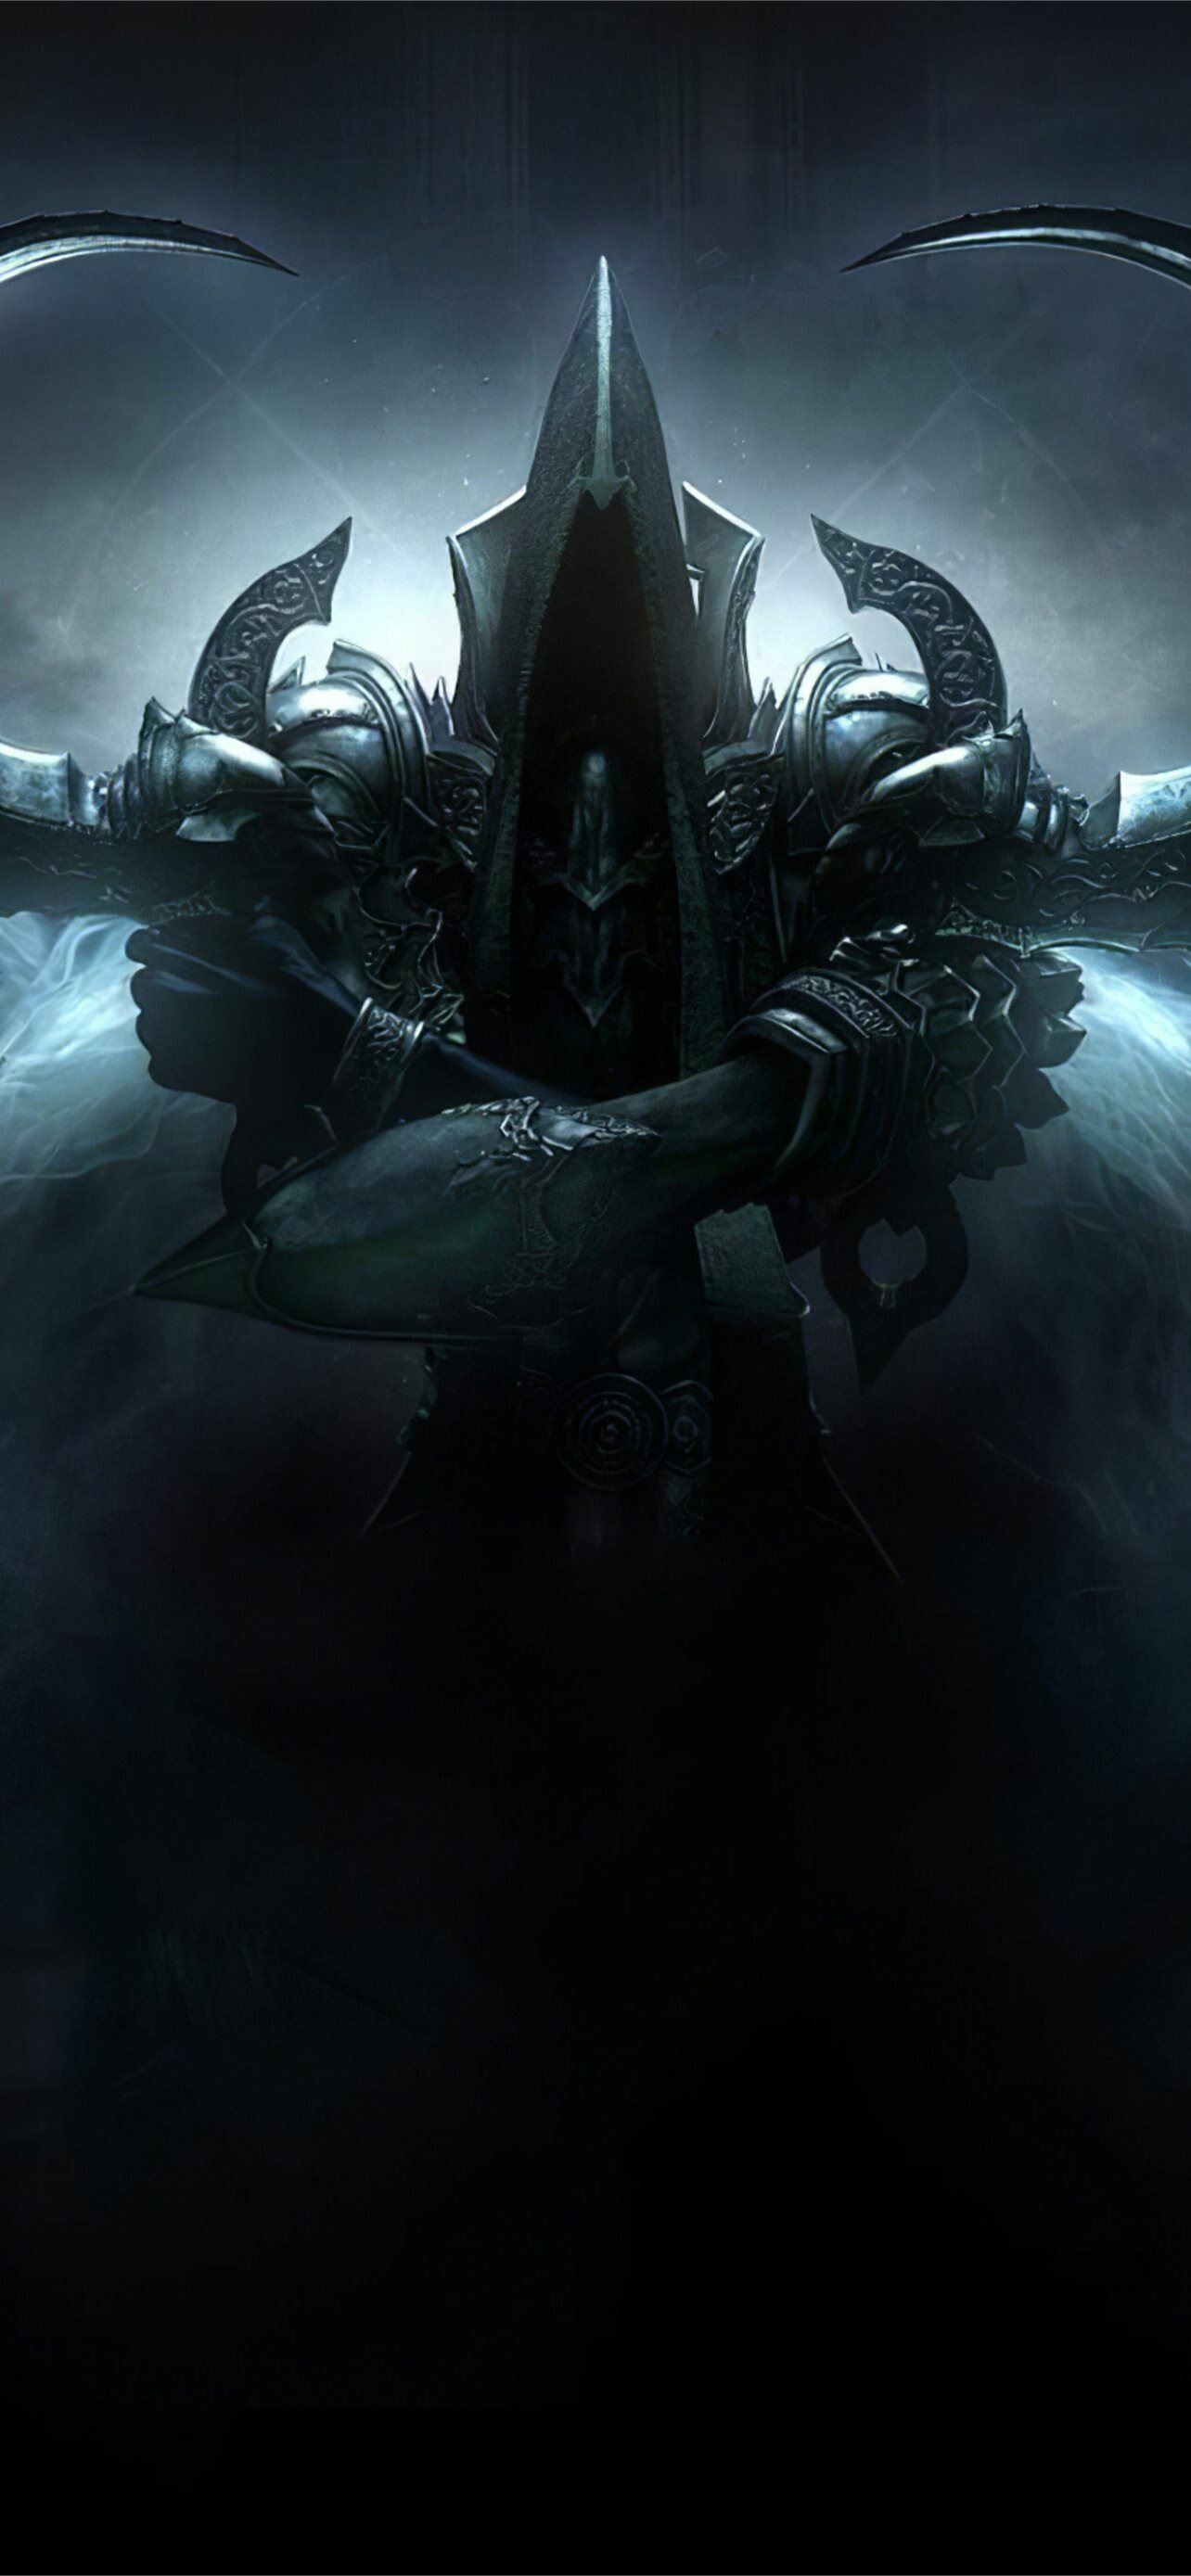 Diablo: The Lord of Terror eventually becomes the Prime Evil after absorbing the six other Great Evils, including his two brothers: Baal, the Lord of Destruction, and Mephisto, the Lord of Hatred. 1290x2780 HD Wallpaper.